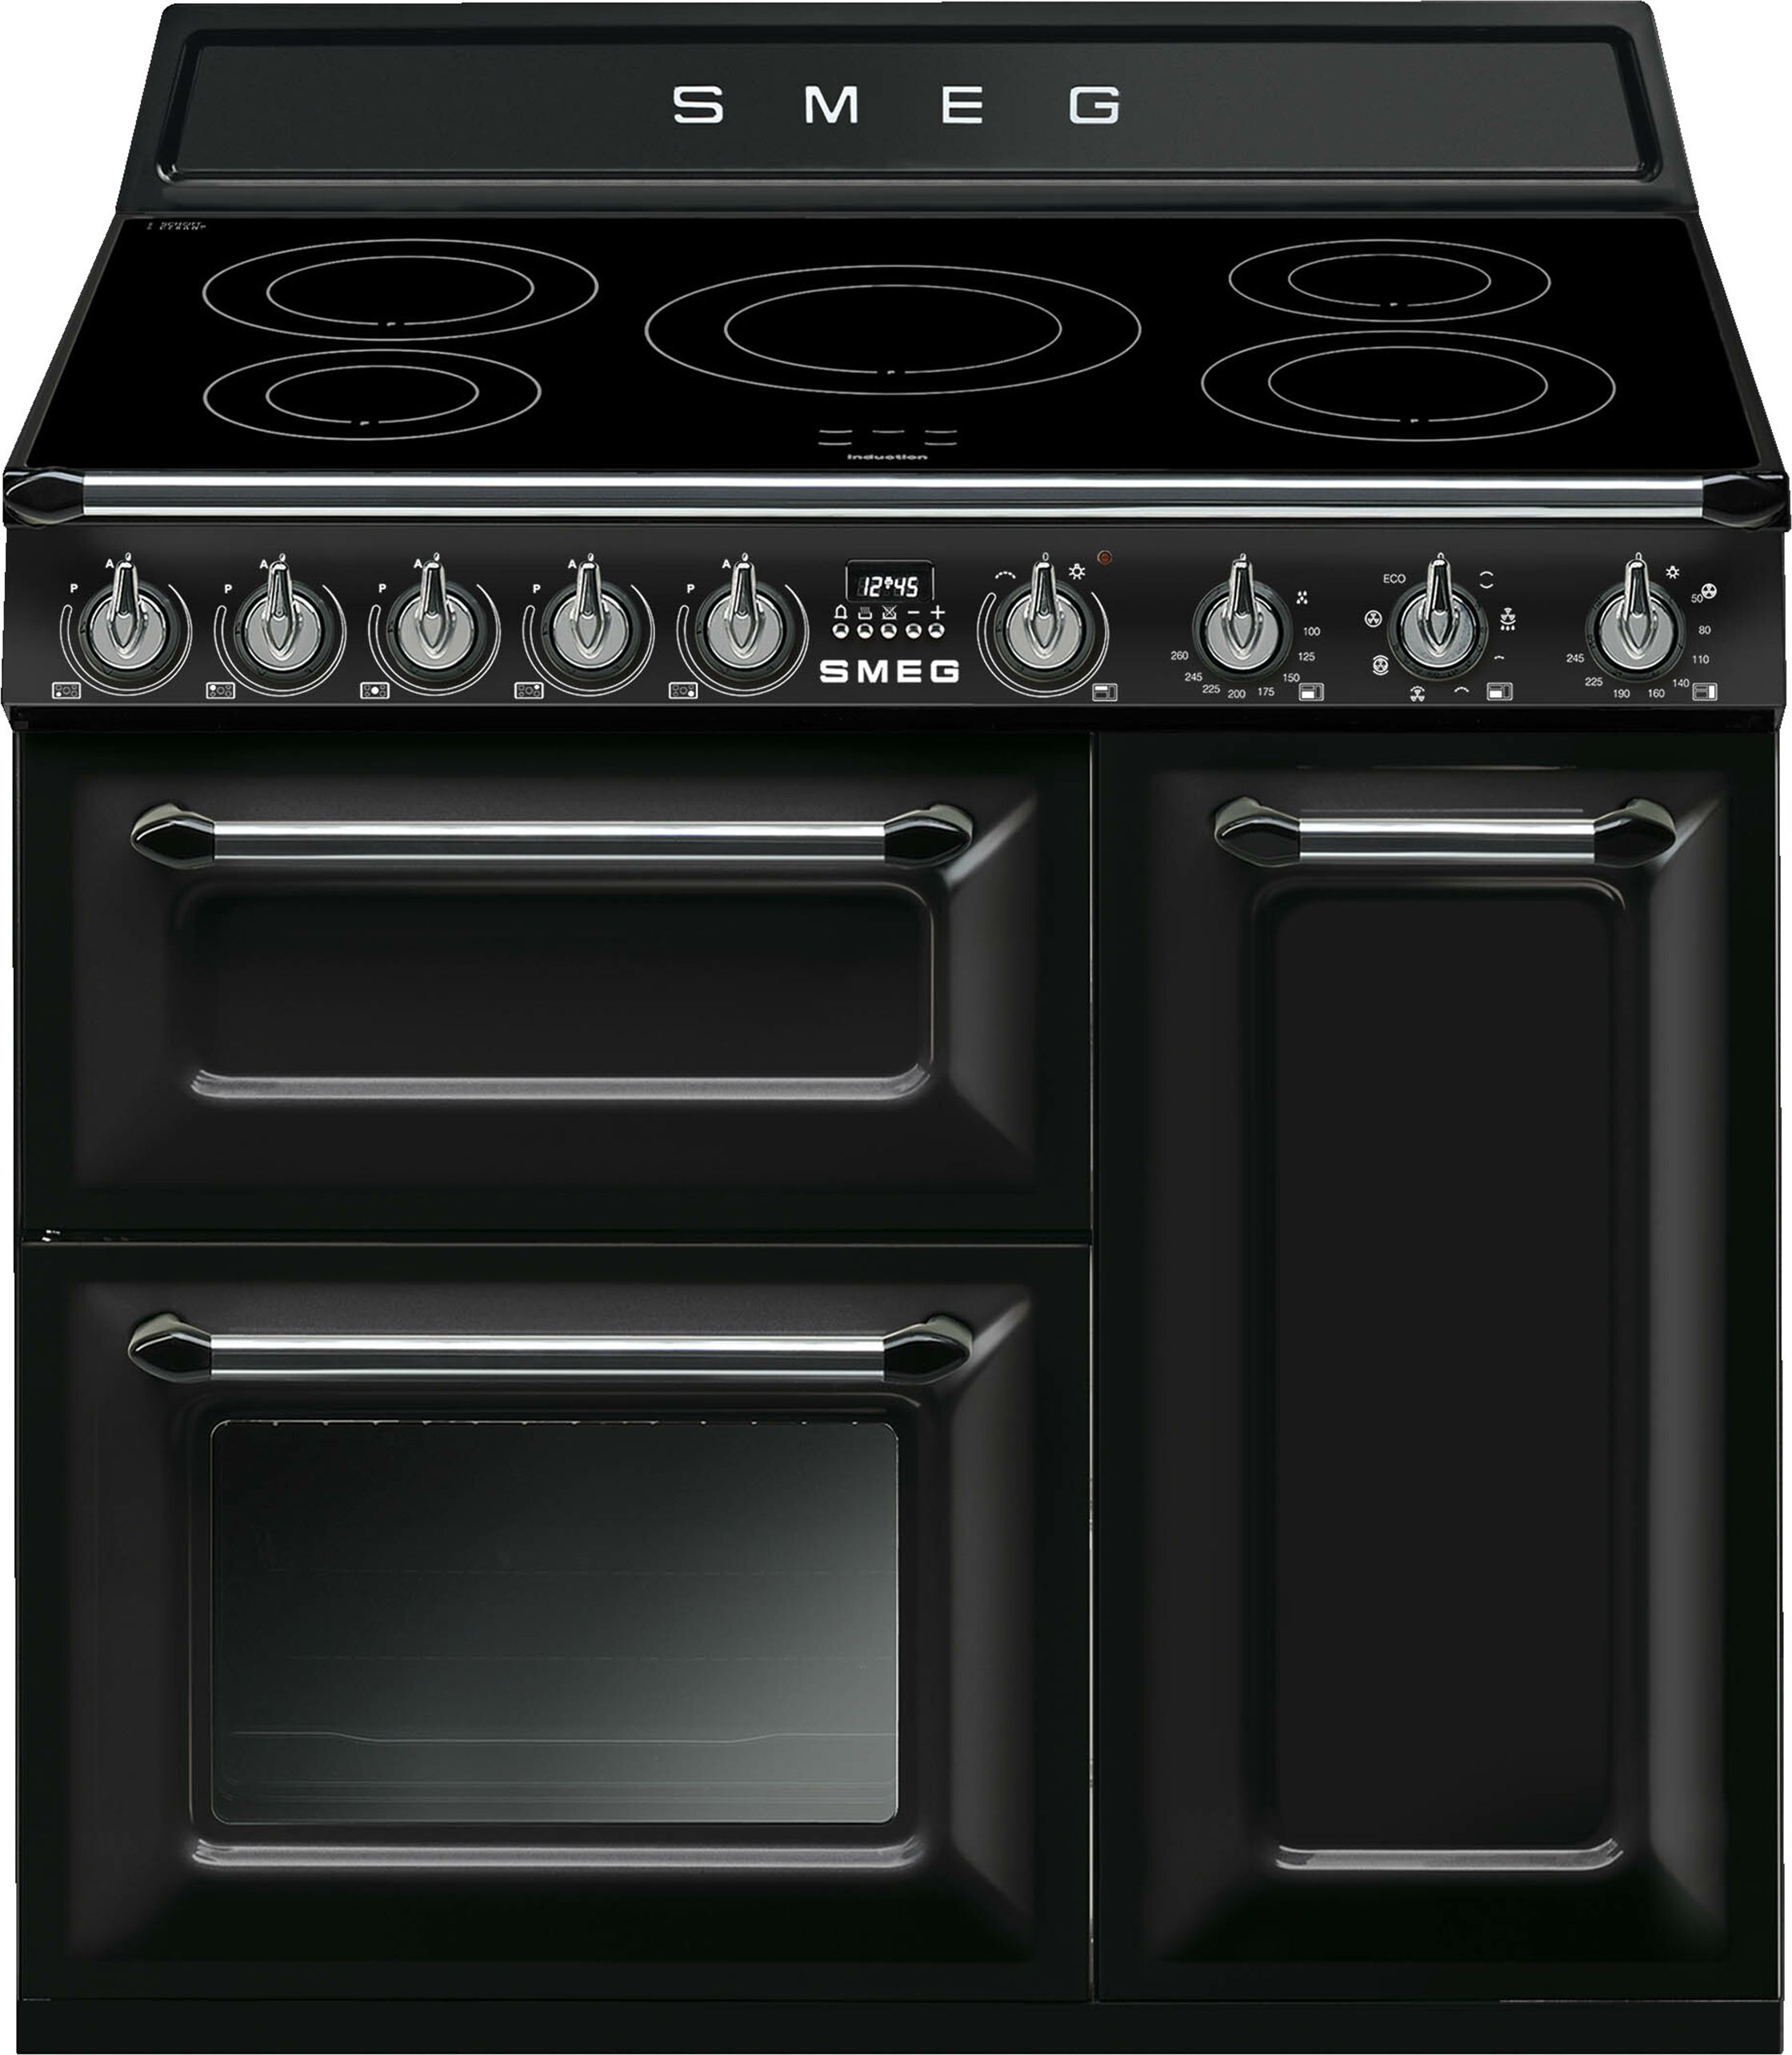 Smeg Victoria TR93IBL2 90cm Electric Range Cooker with Induction Hob - Black - A/B Rated, Black